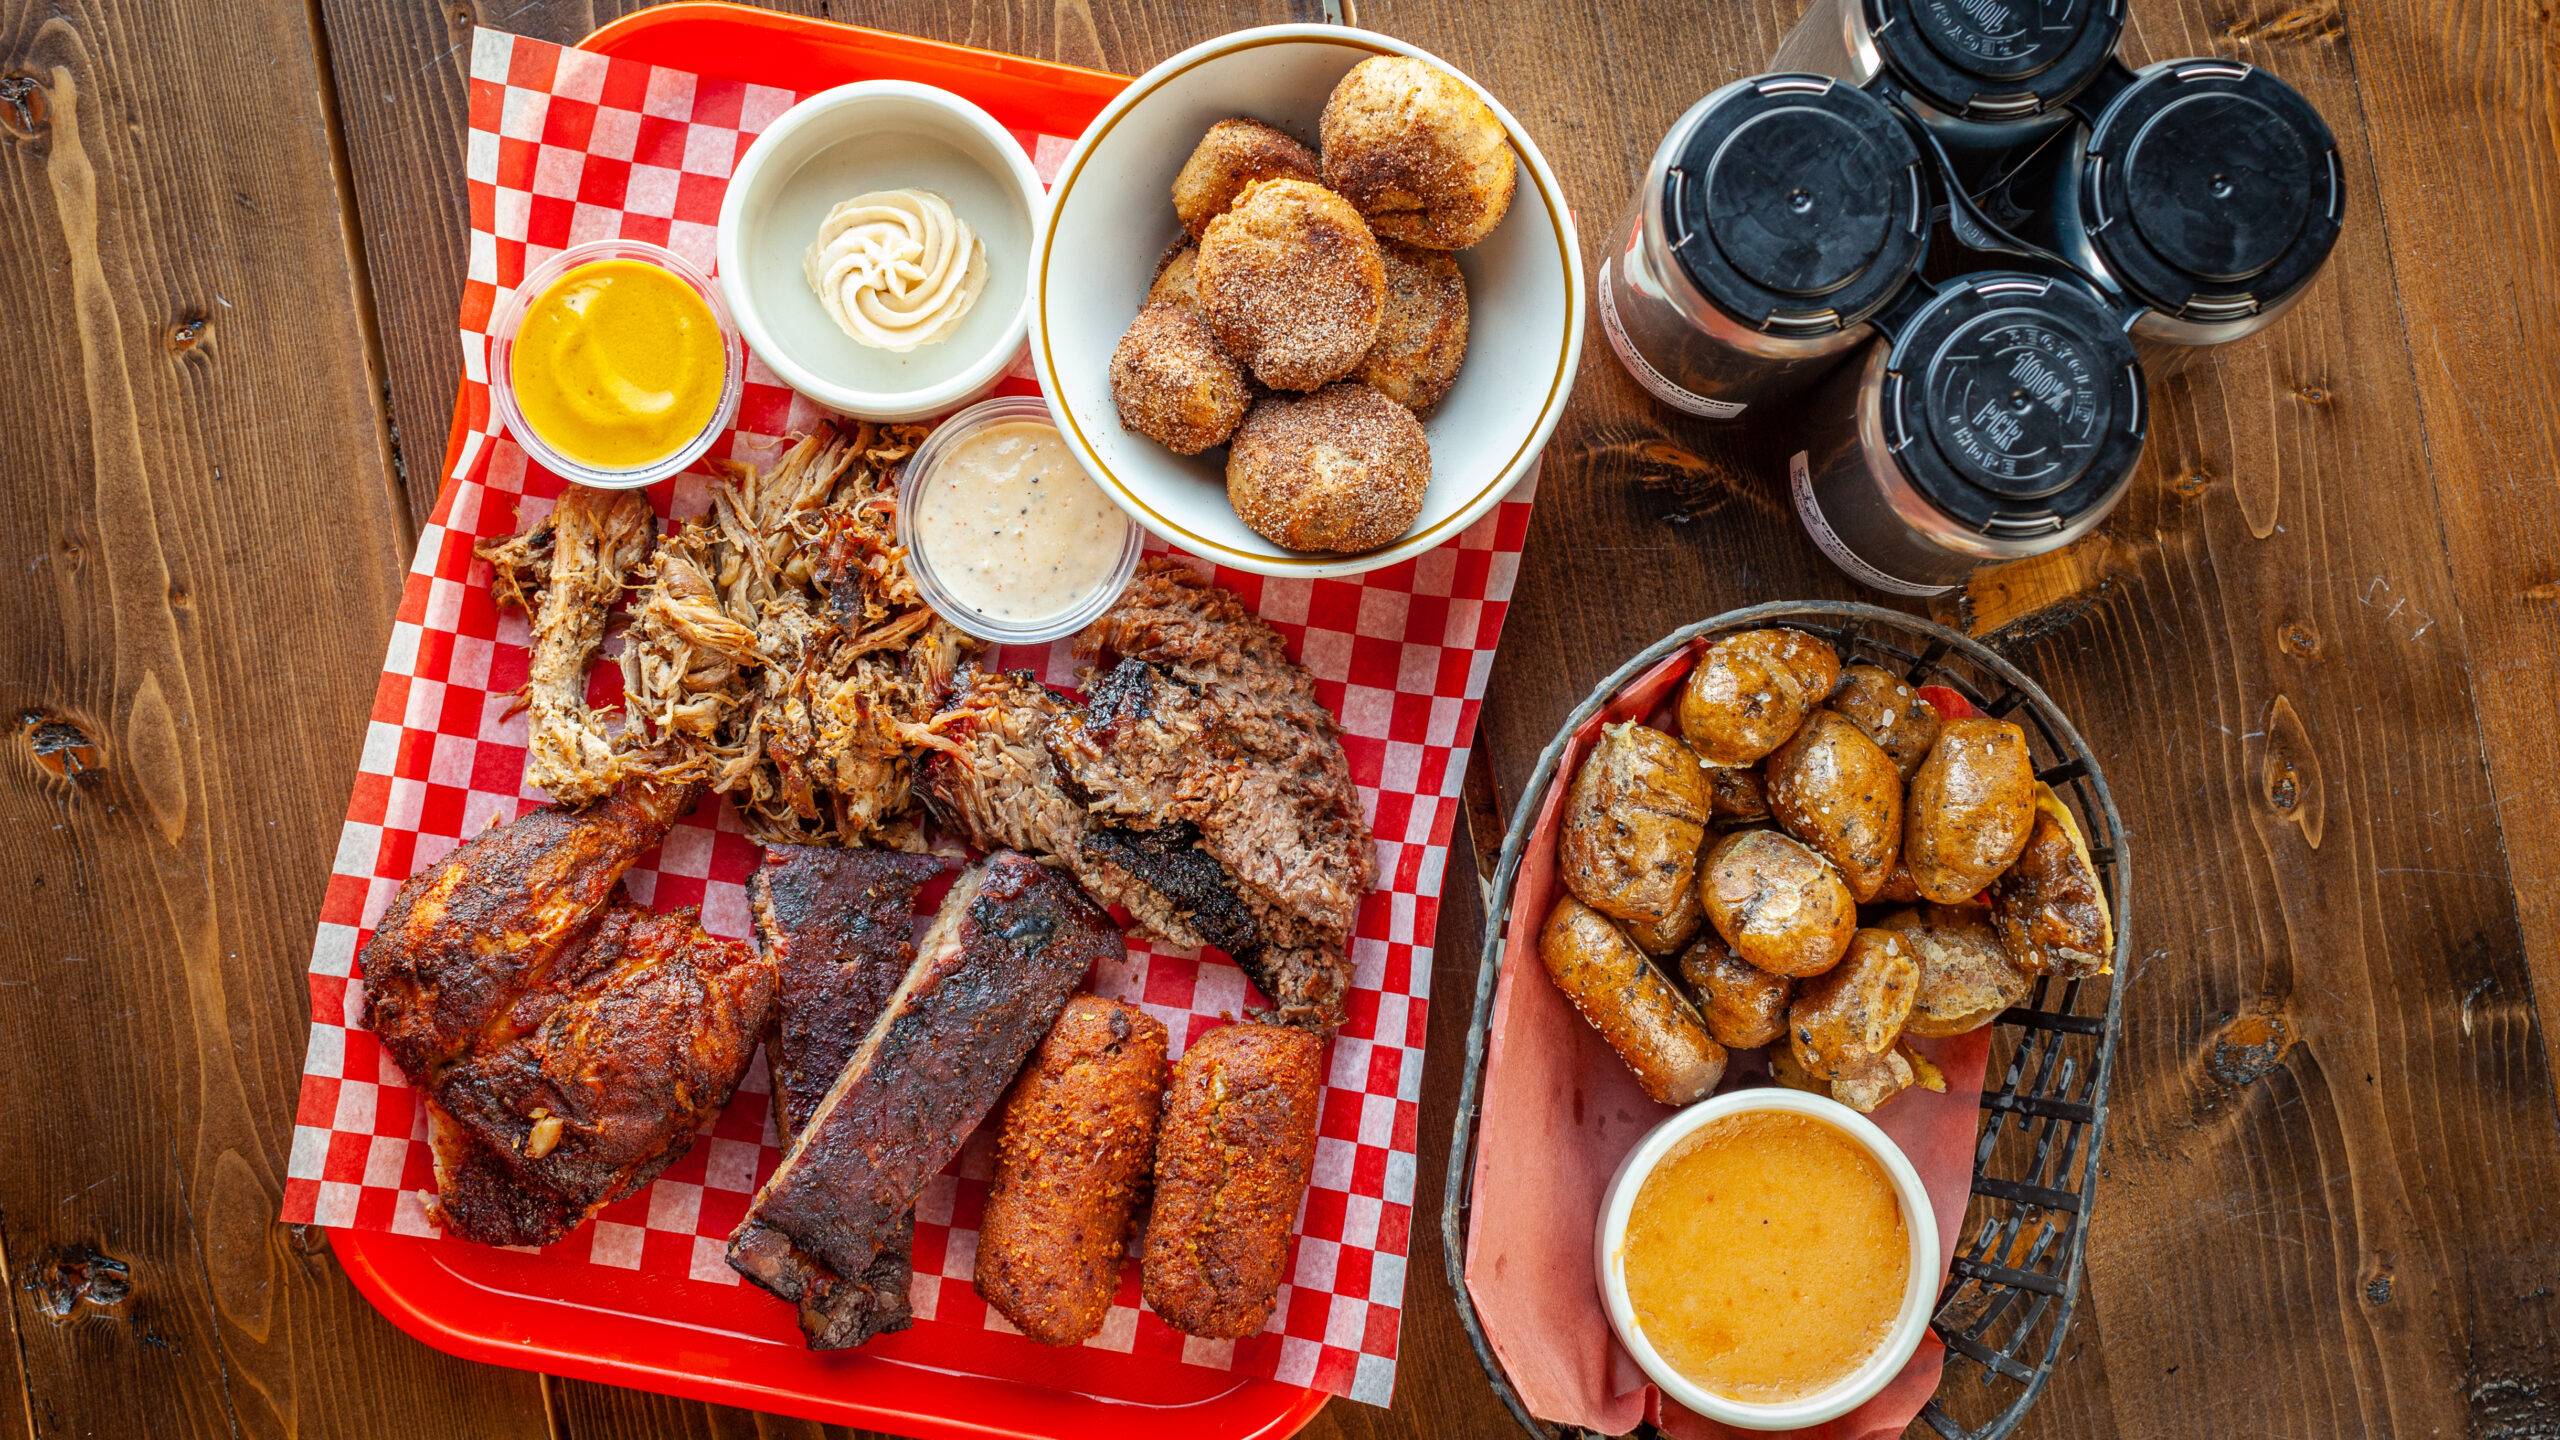 Prairie Dog Brewing Date Night combo platter with beer, barbecue and pretzel bites.